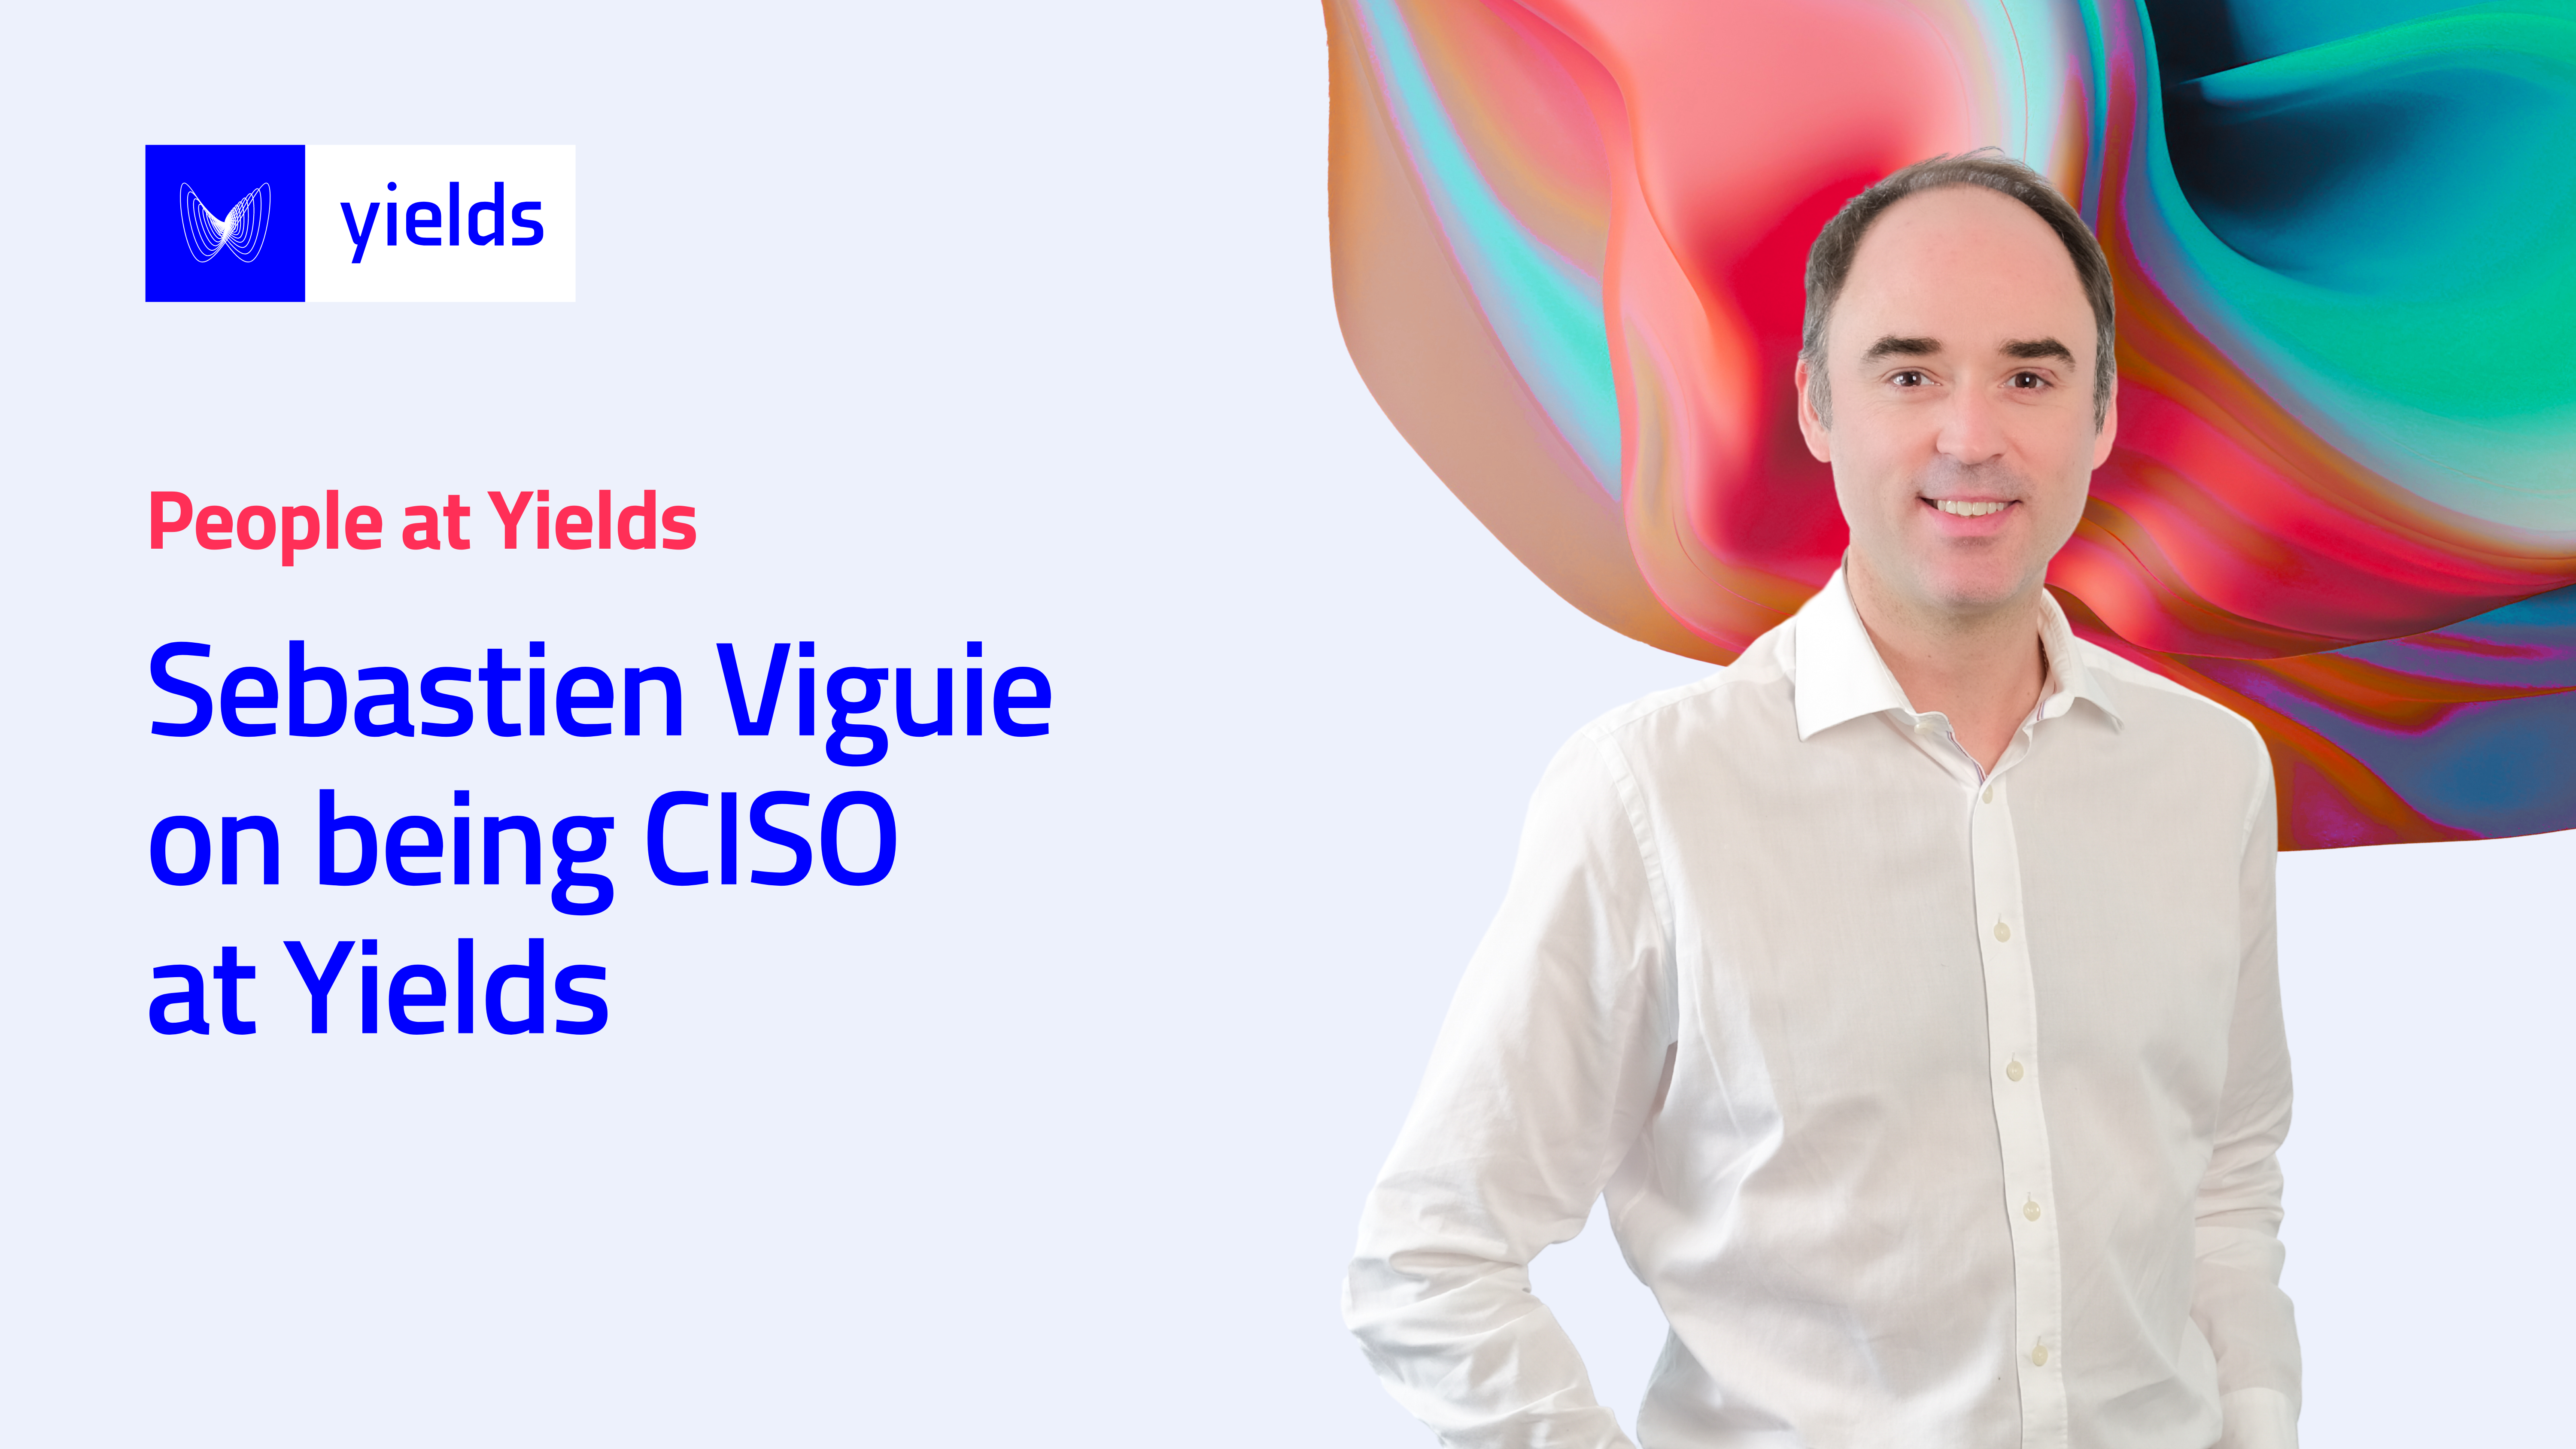 Sebastien Viguie on being CISO at Yields